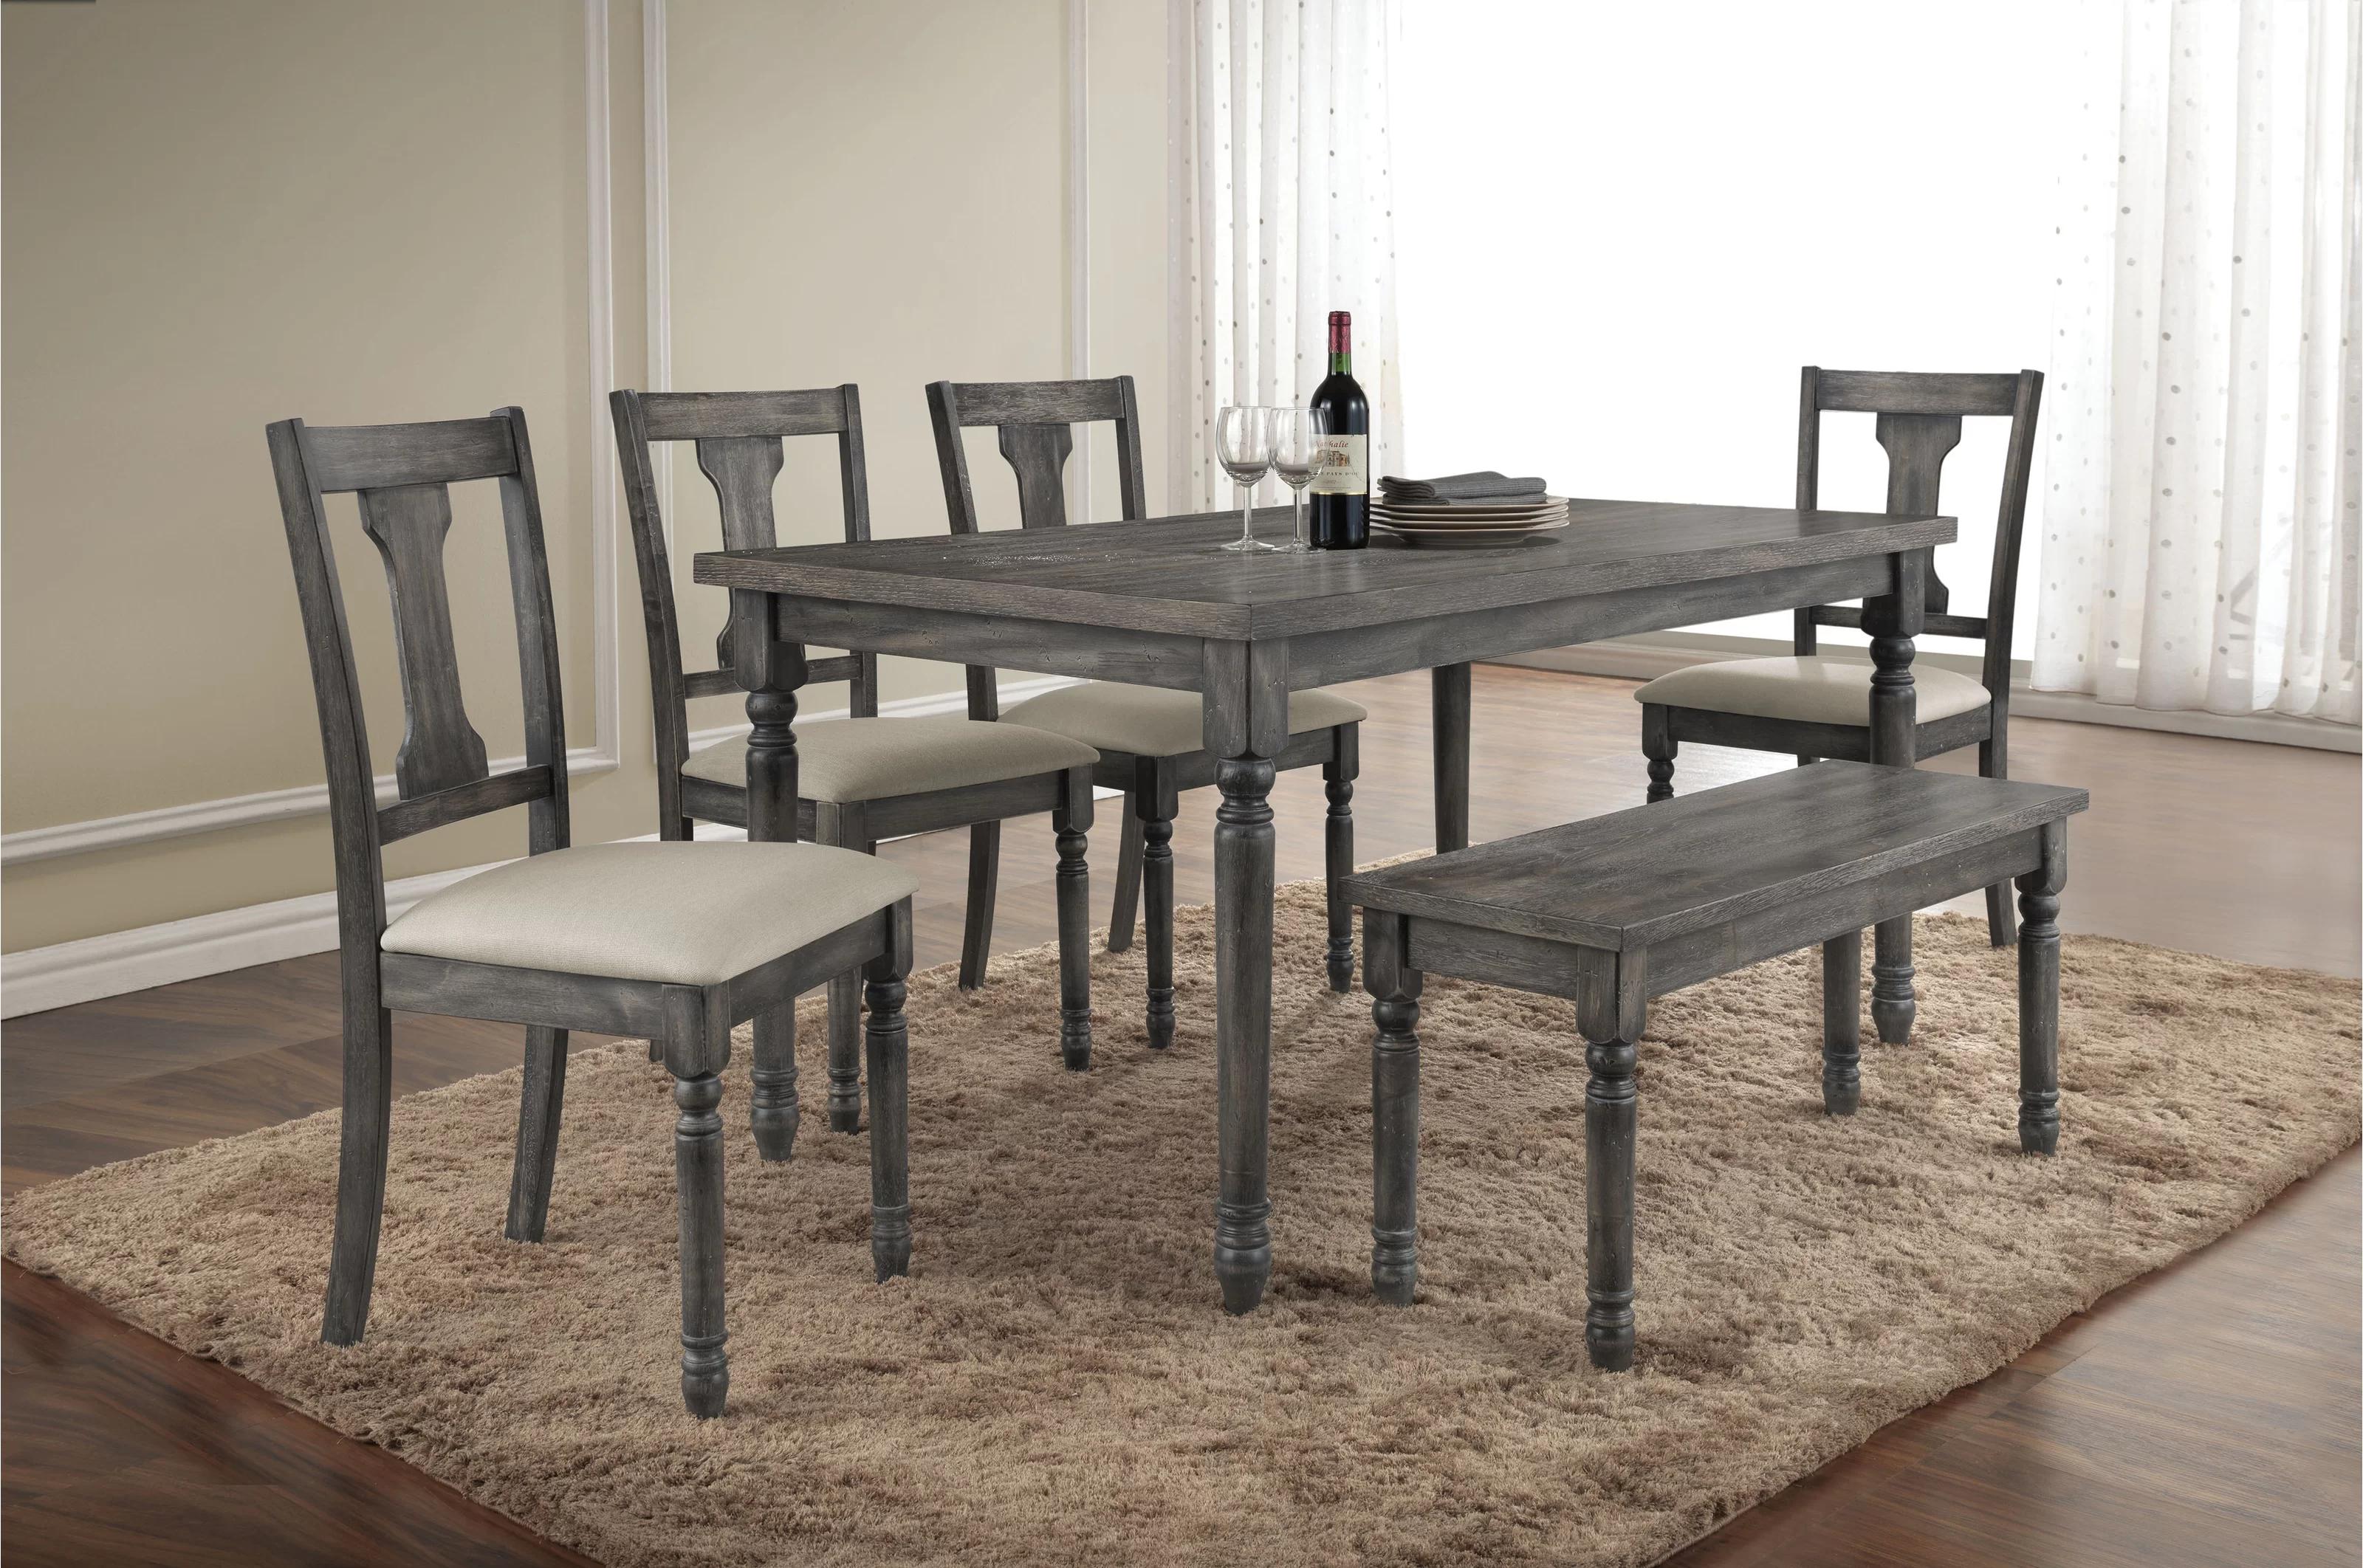 Contemporary, Rustic Dining Room Set Wallace 71435-10pcs in Gray 